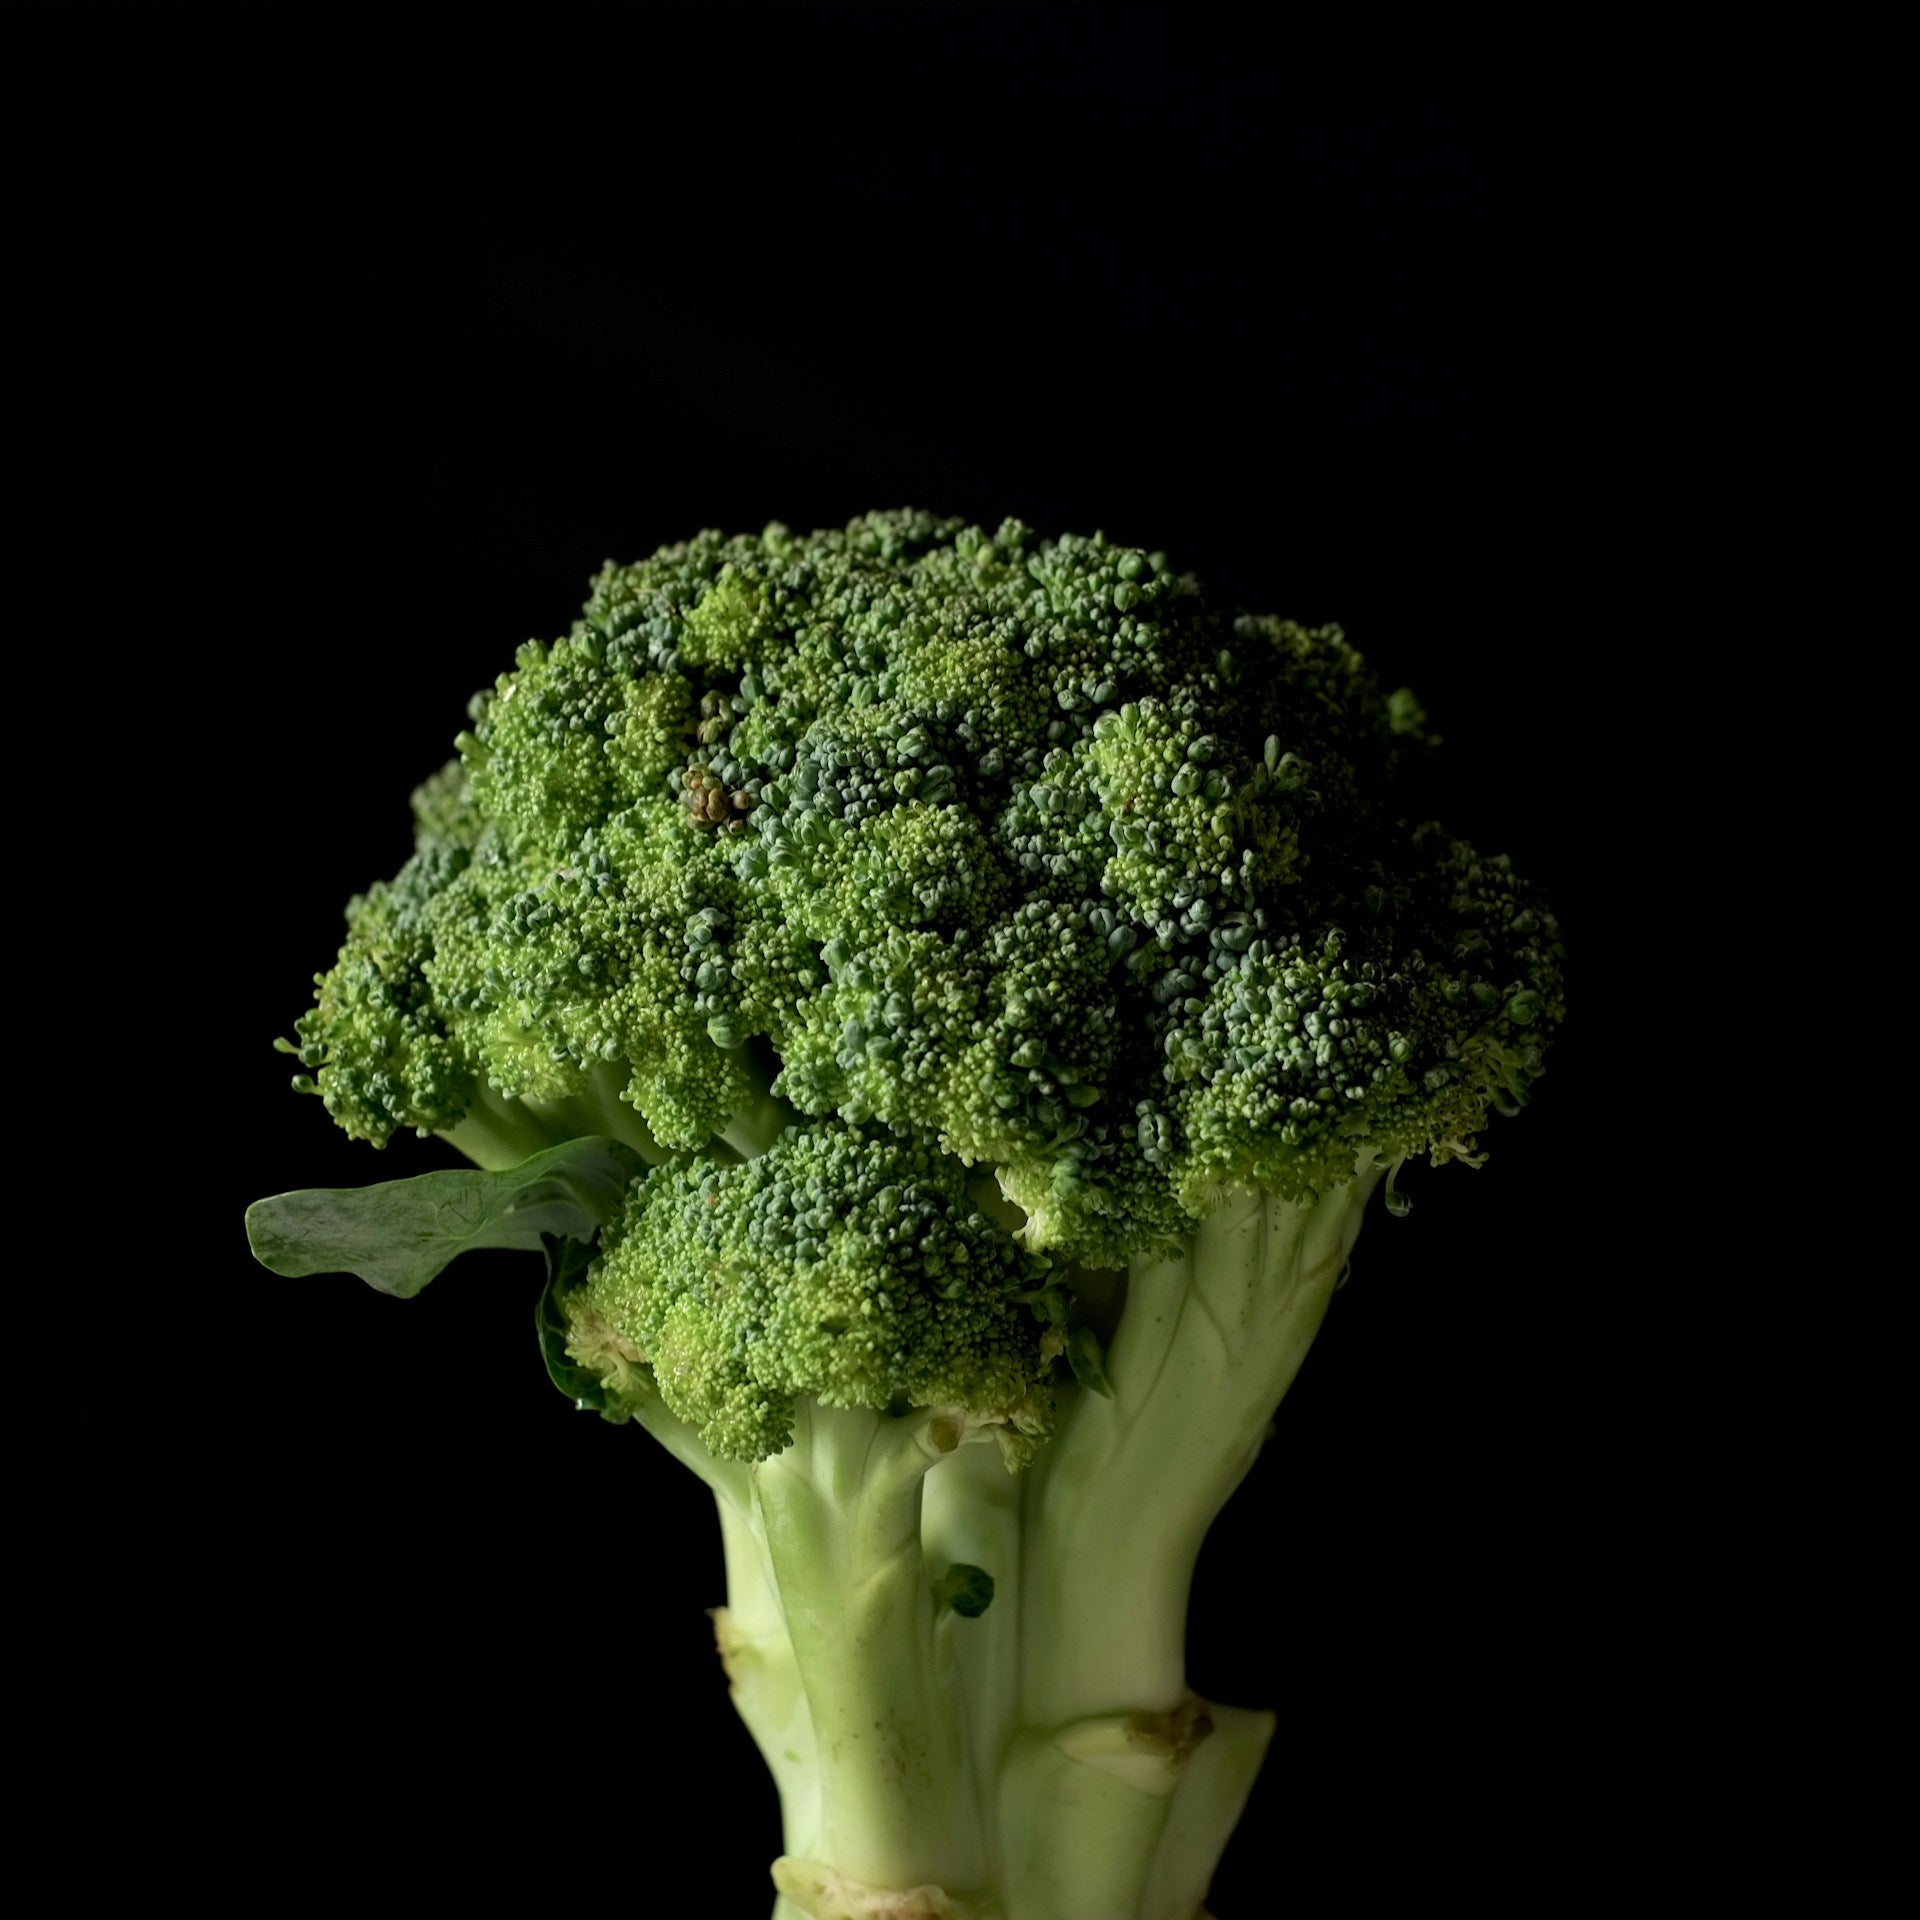 On display is broccoli, of the variety Di Cicco.  Only one individual head of broccoli is on display, which contains the green small nodules typical of a broccoli head.  One small green leaf attempts to protrude from the left side. 